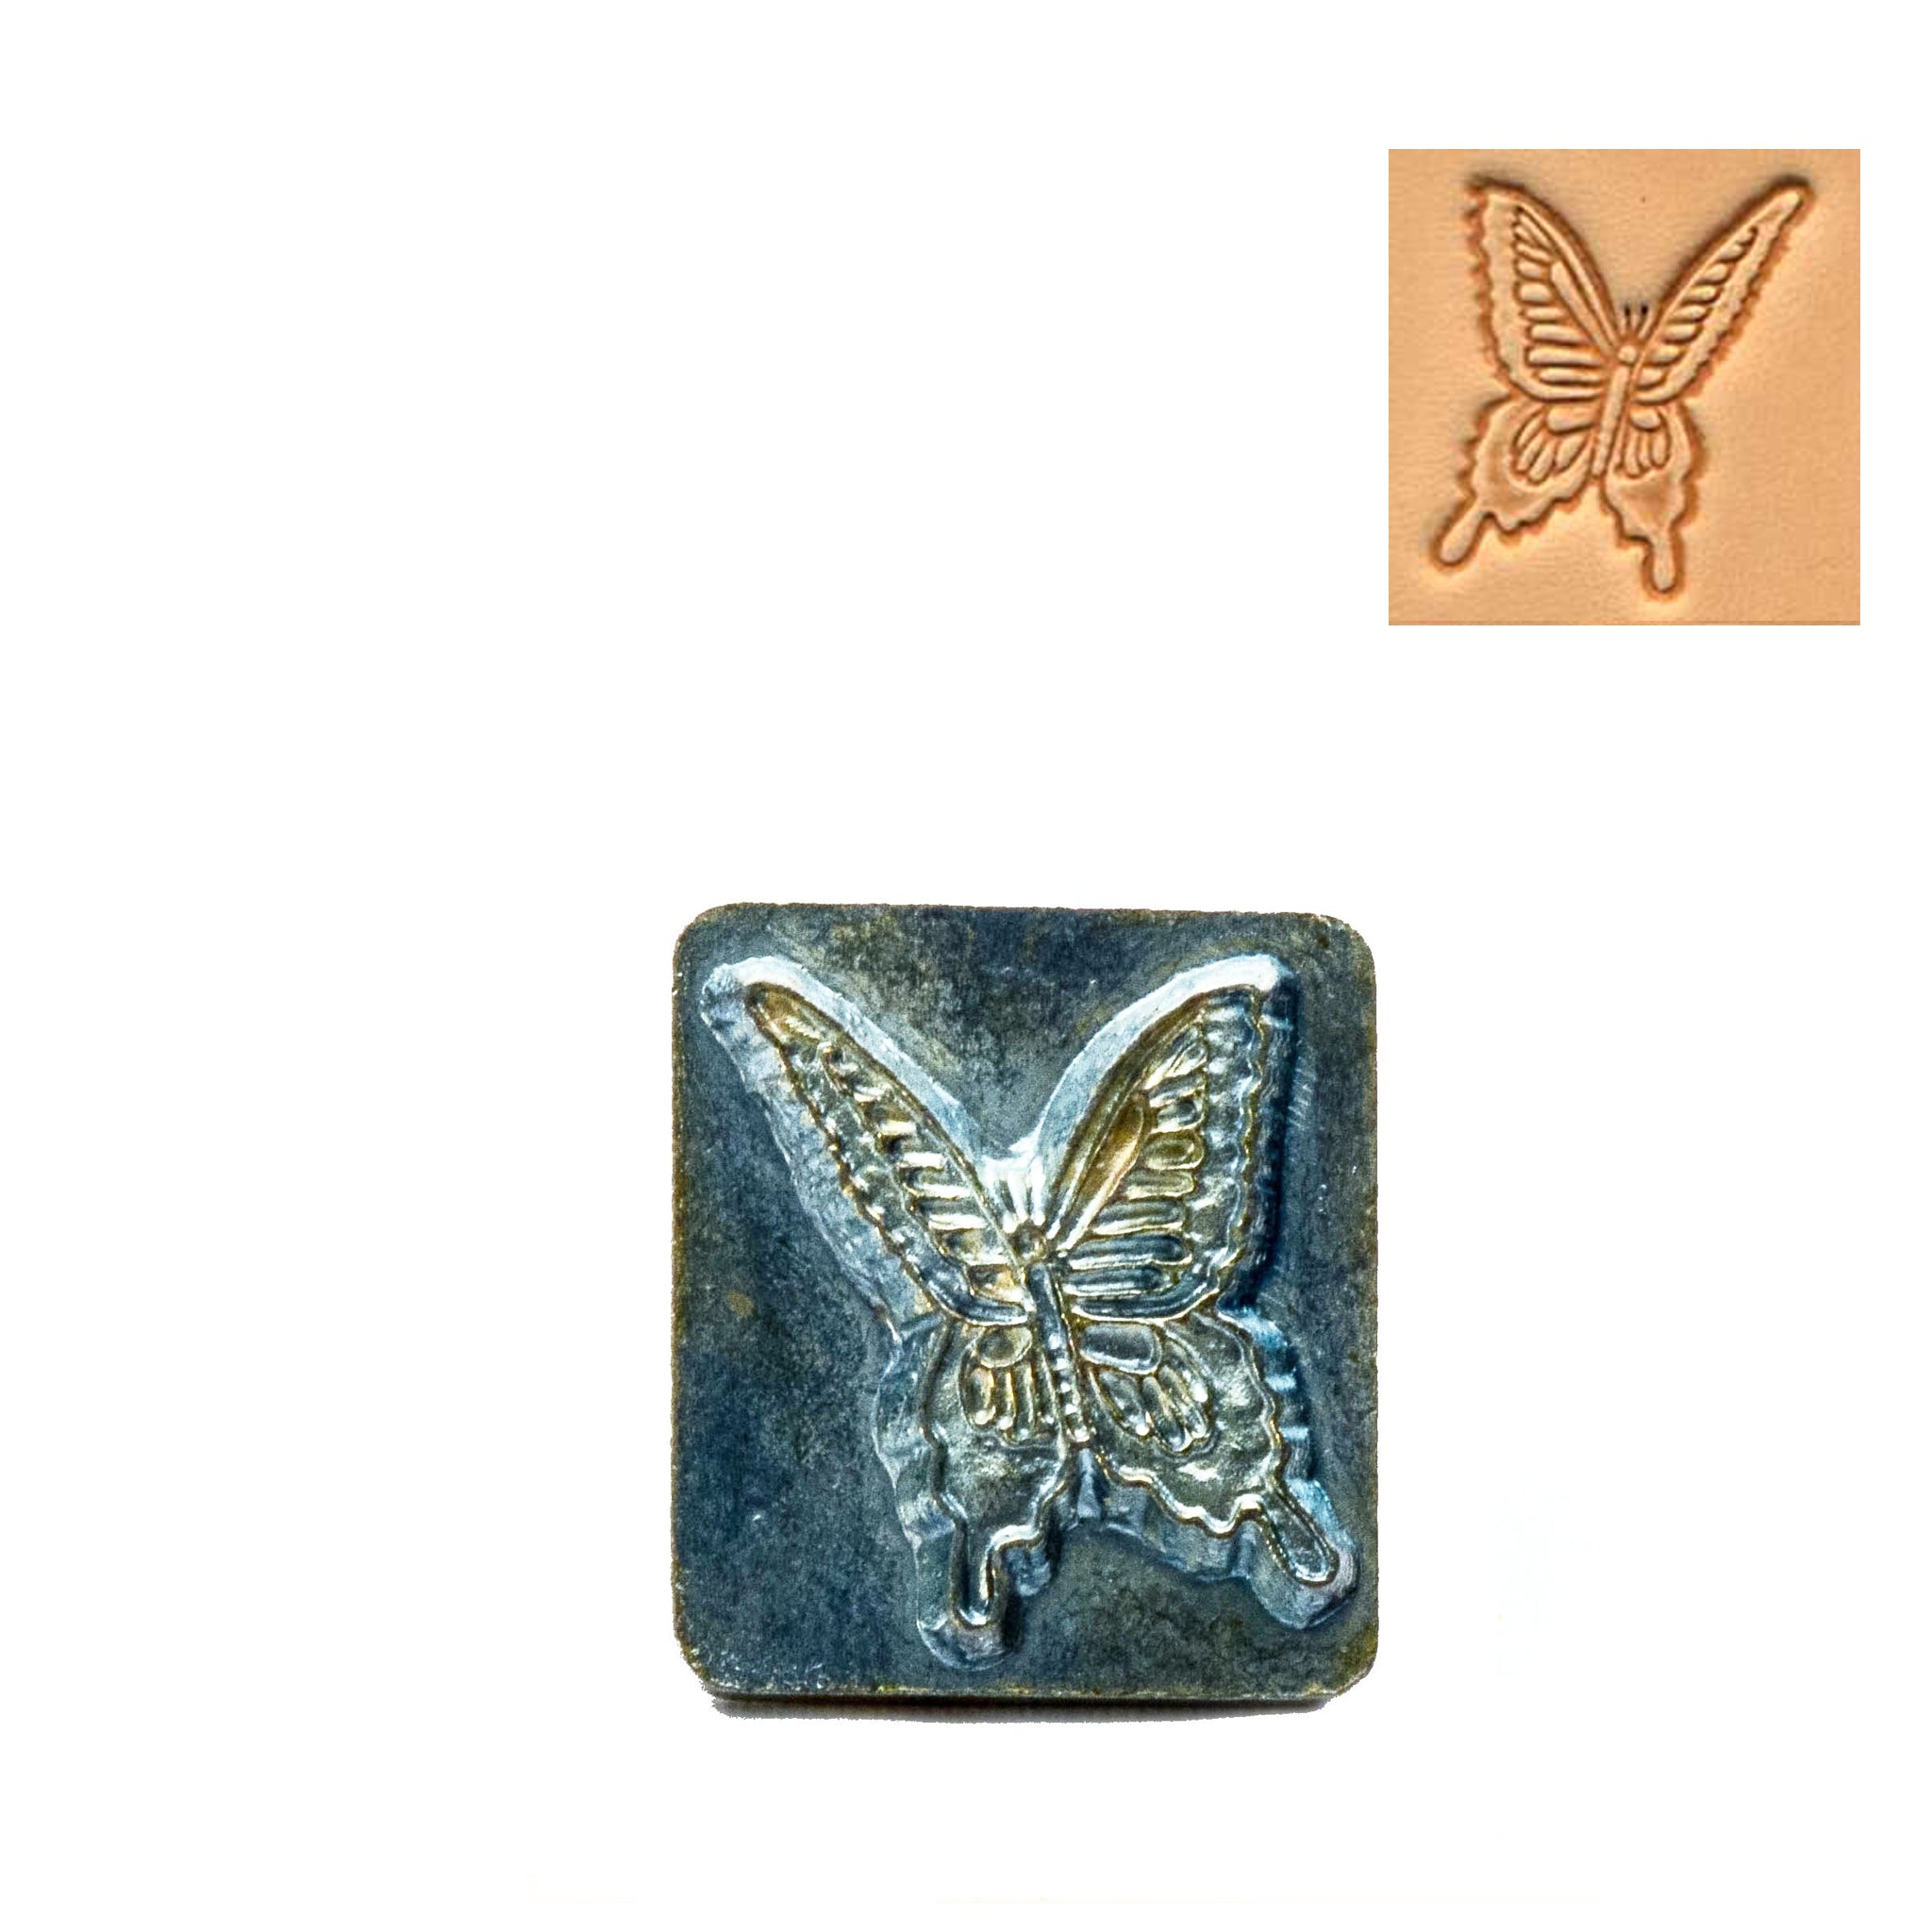 Butterfly 3D Embossing Stamp from Identity Leathercraft